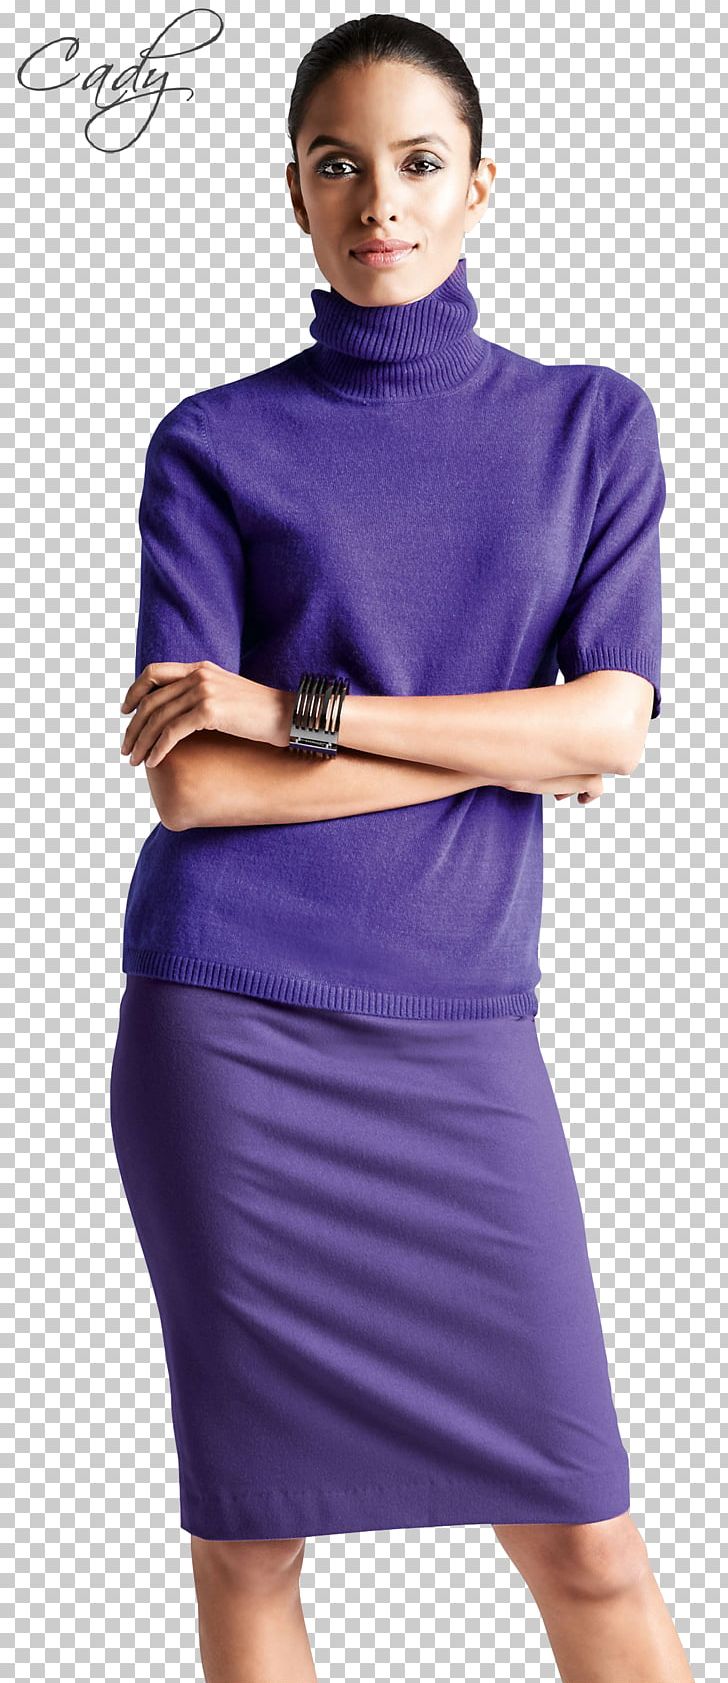 Skirt Clothing Online Shopping Dress Blouse PNG, Clipart, Blouse, Clothing, Dress, Electric Blue, Fashion Free PNG Download